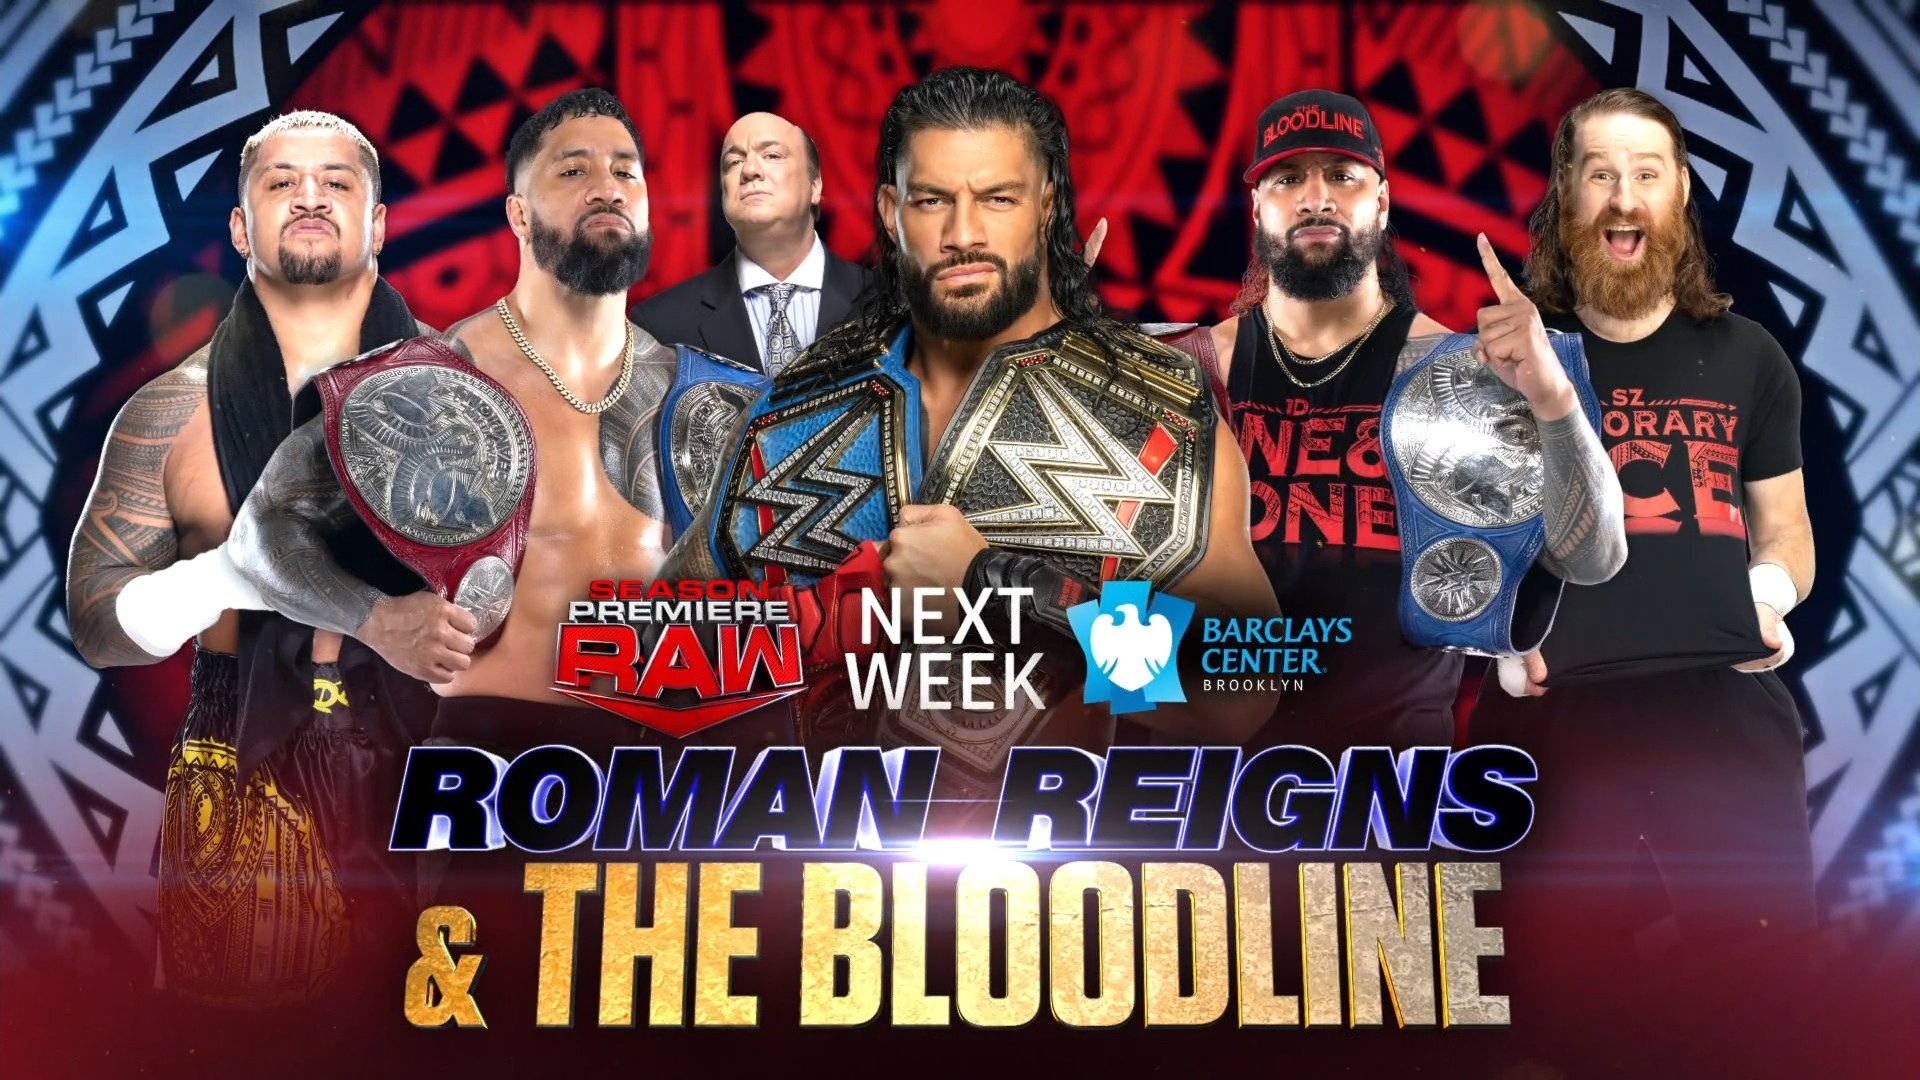 WWE Raw 2022 Season Premiere: The Bloodline To Appear; Title Match Confirmed 1